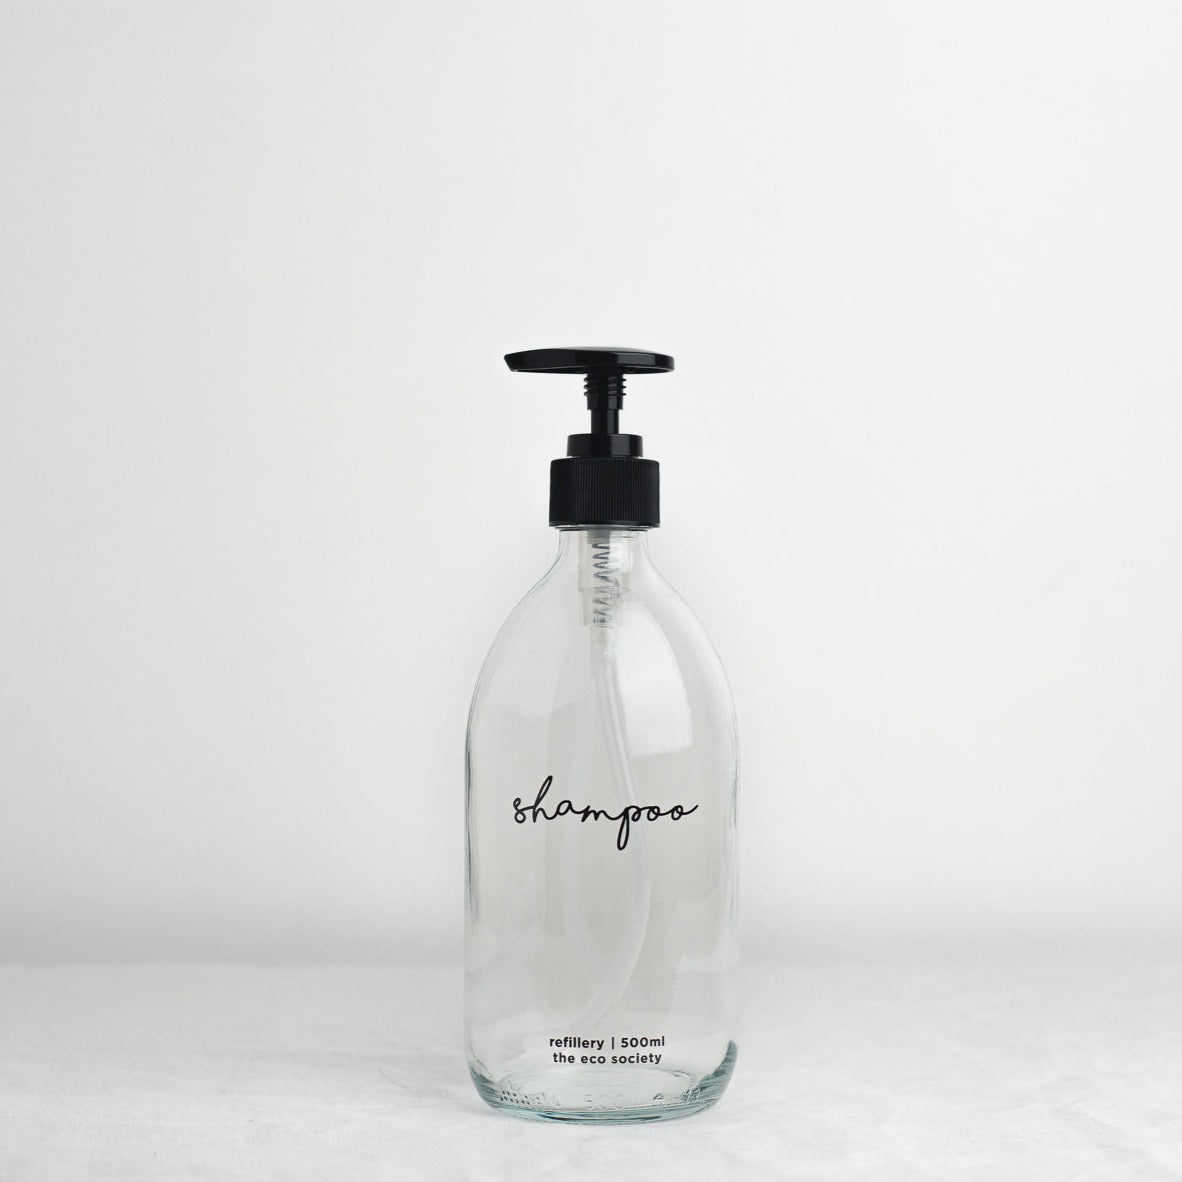 Clear Glass Bottle with Black printed text "Shampoo" 500ml Refillery Bottle